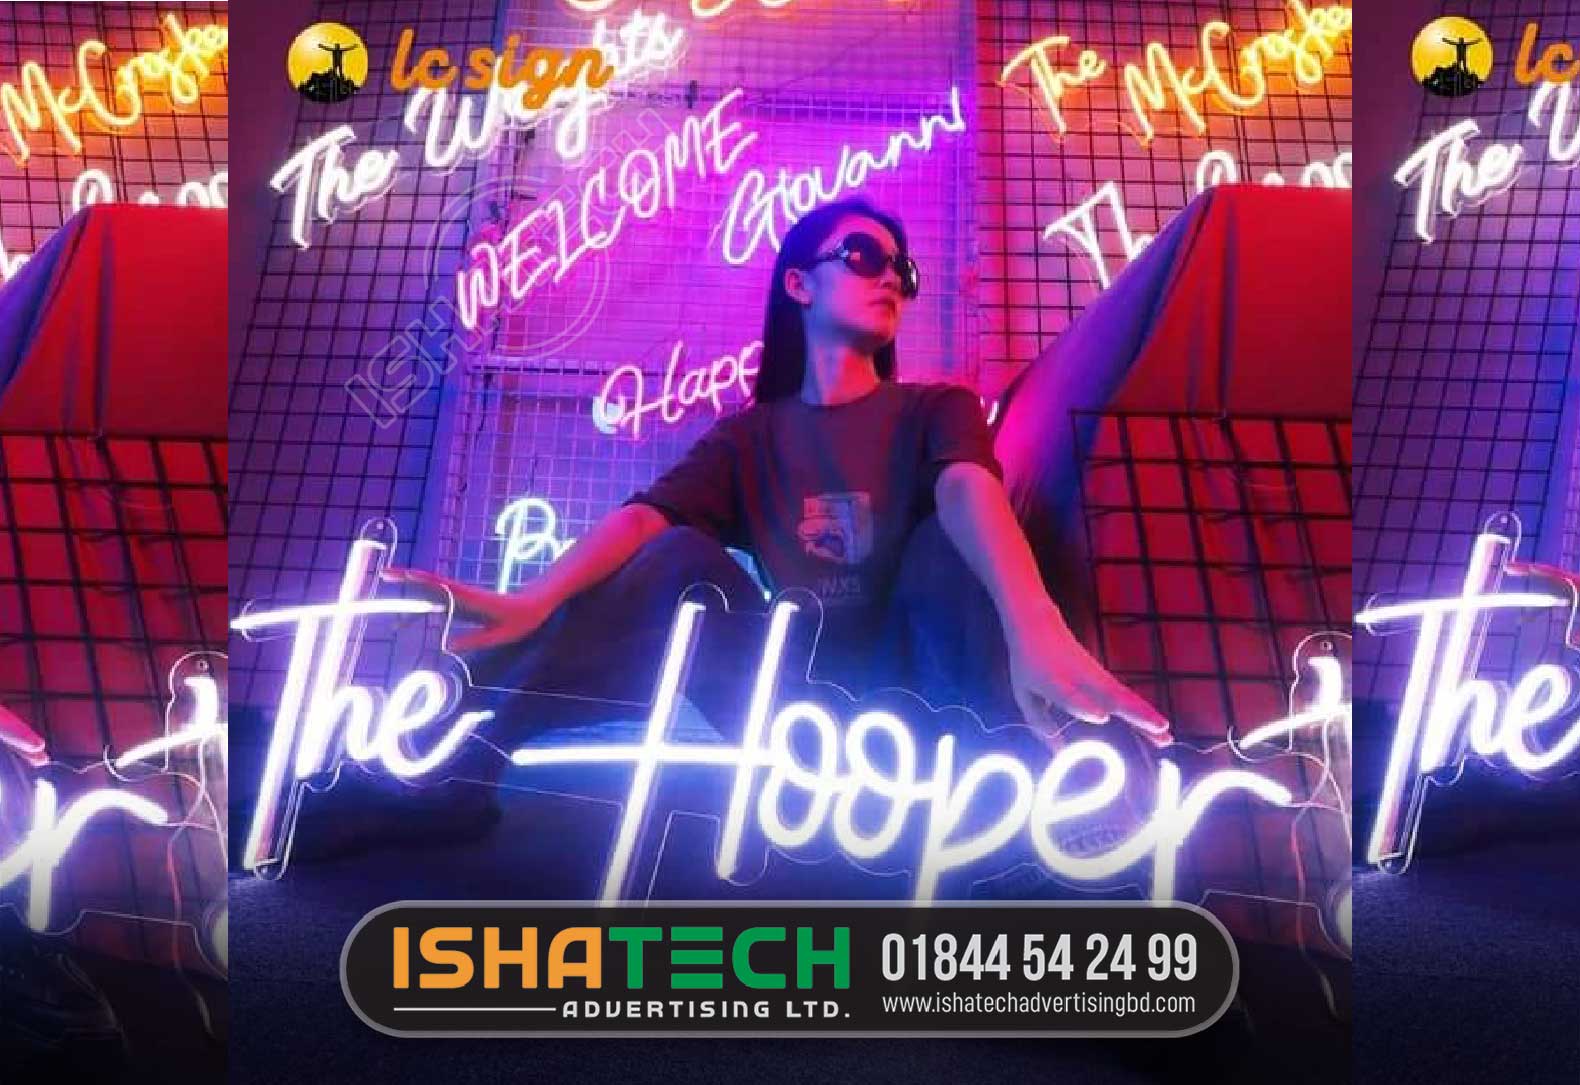 THE HOOPER EVENT NEON SIGNS, NIKKA PARTITION NEON SIGNS, WEDDING NEON SIGNS, NEON ADVERTISING AGENCY IN DHAKA BANGLADESH, BEST LED NEON SIGNAGE BD, SIGNBOARD ADVERTISING AGENCY BD,